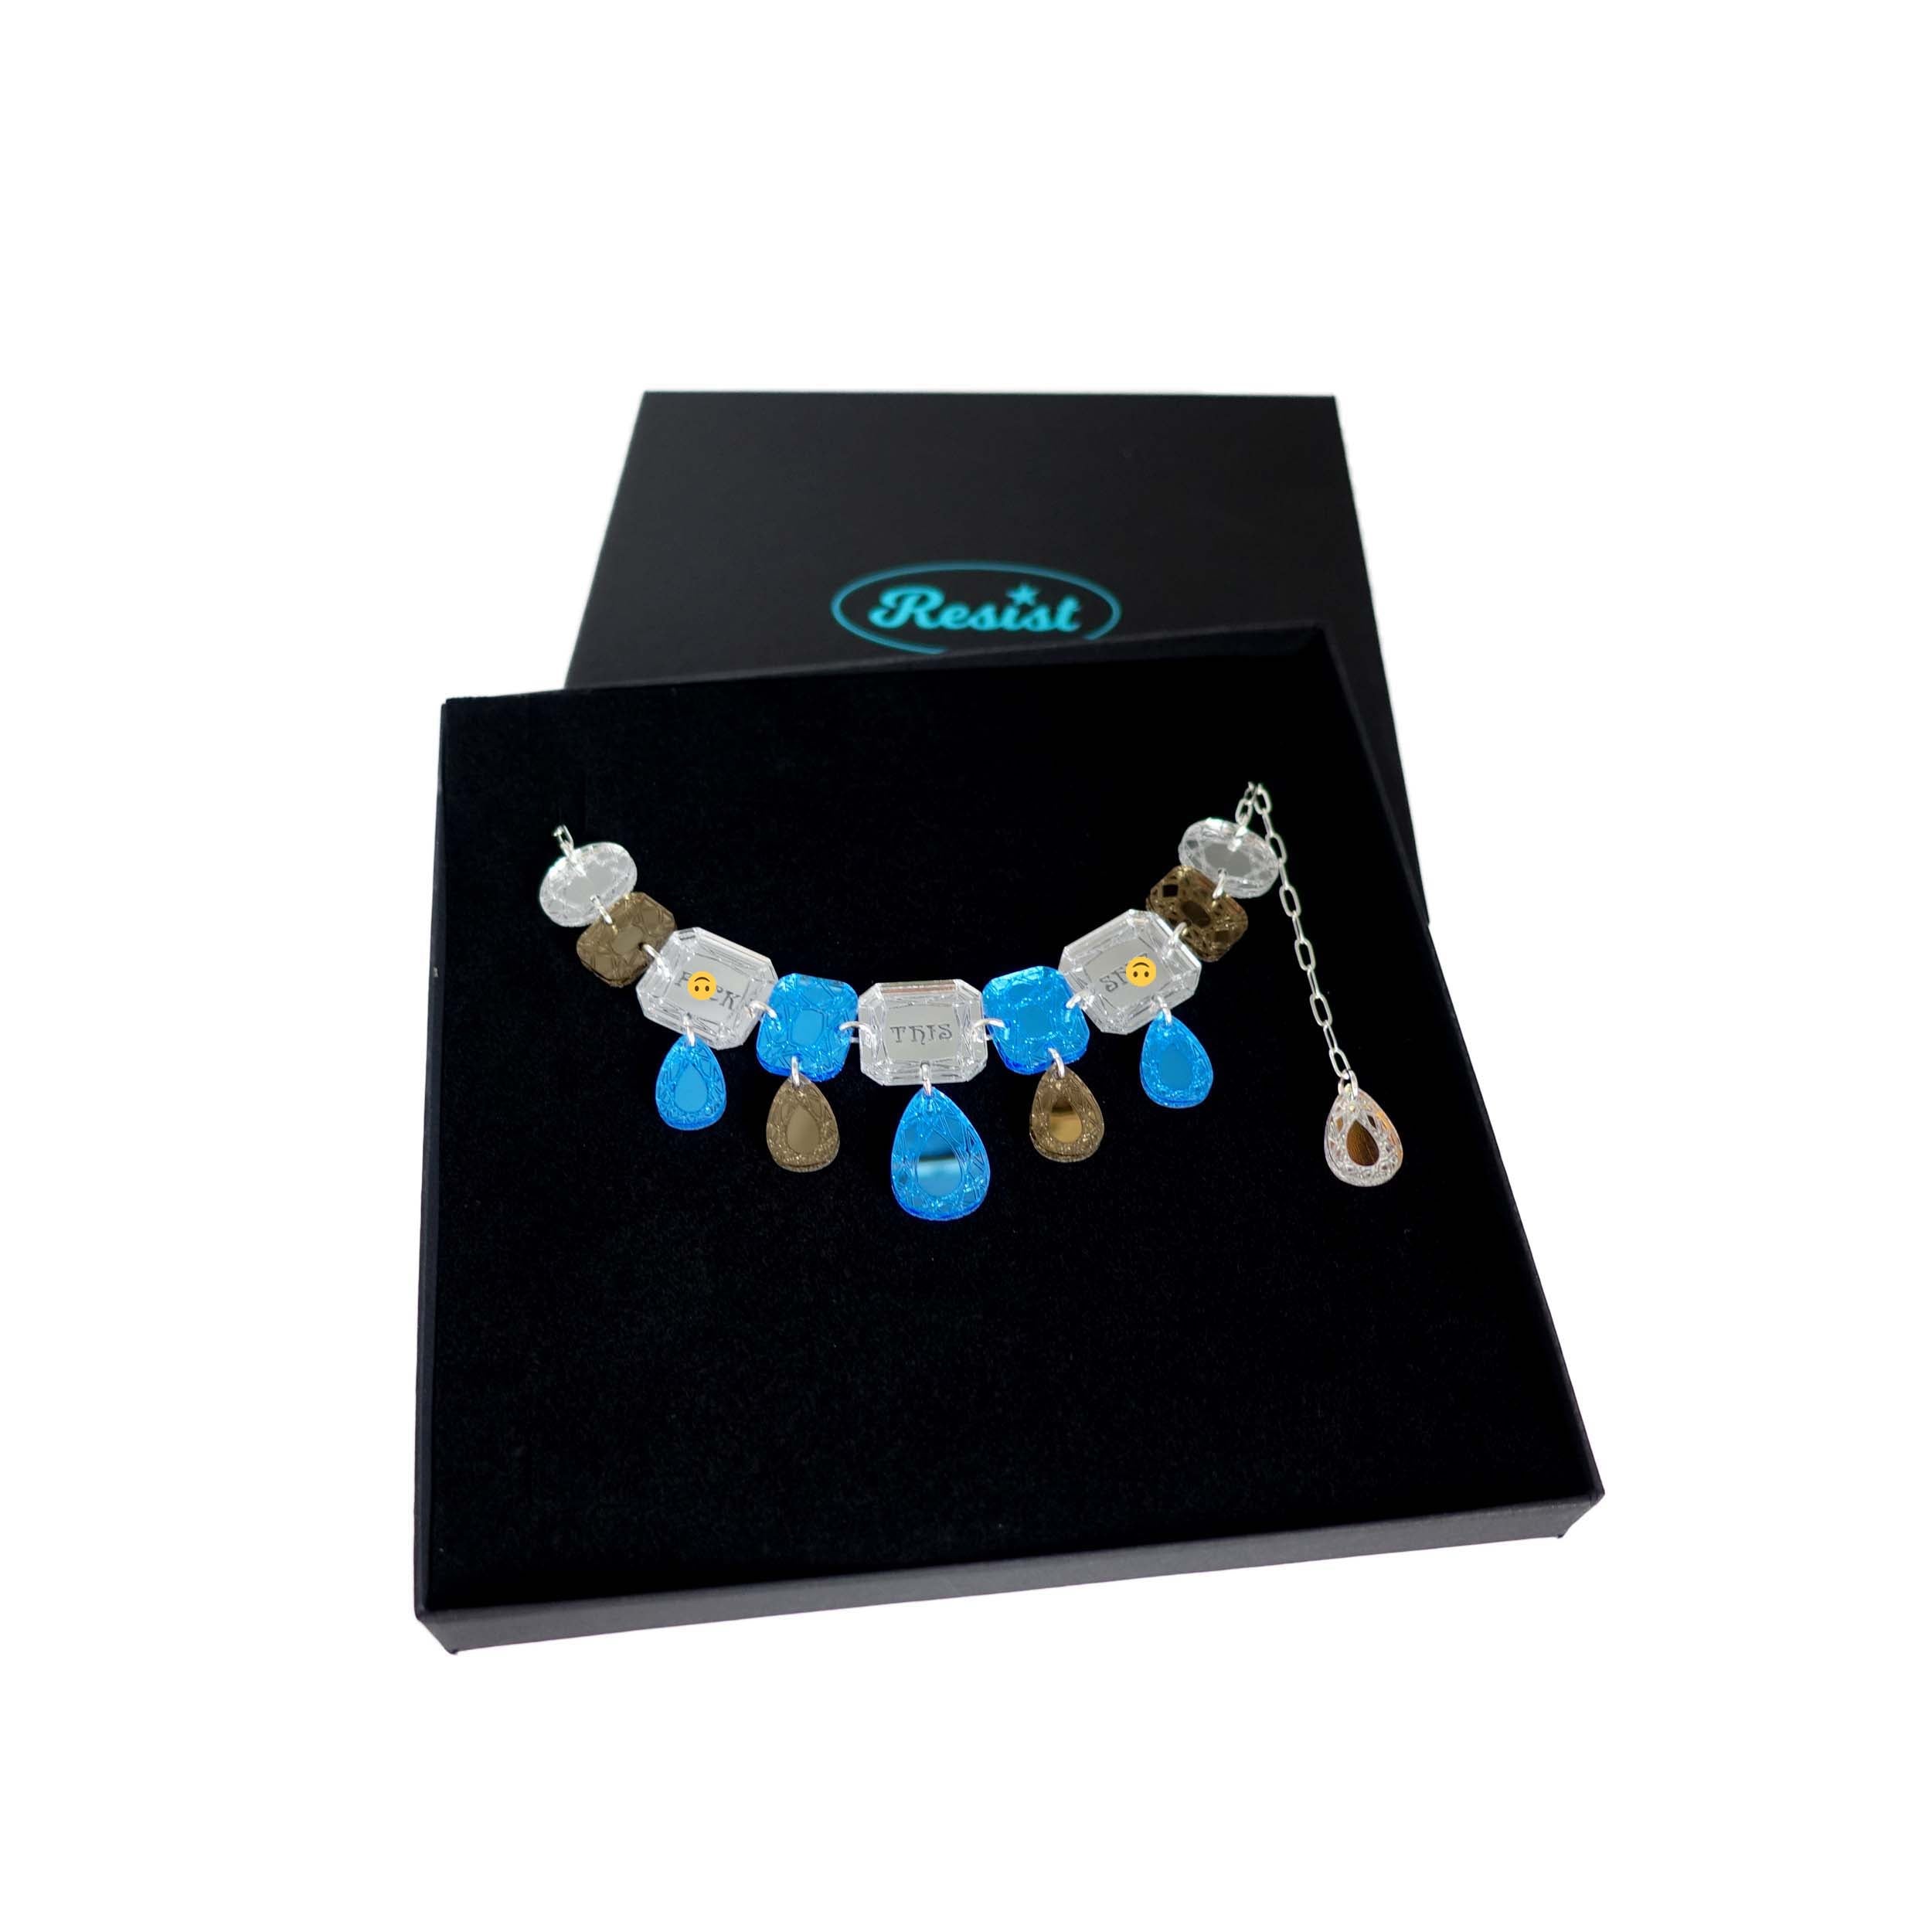 A blue silver and bronze F*ck this Sh*t jewel necklace, shown in a Wear and Resist gift box. 